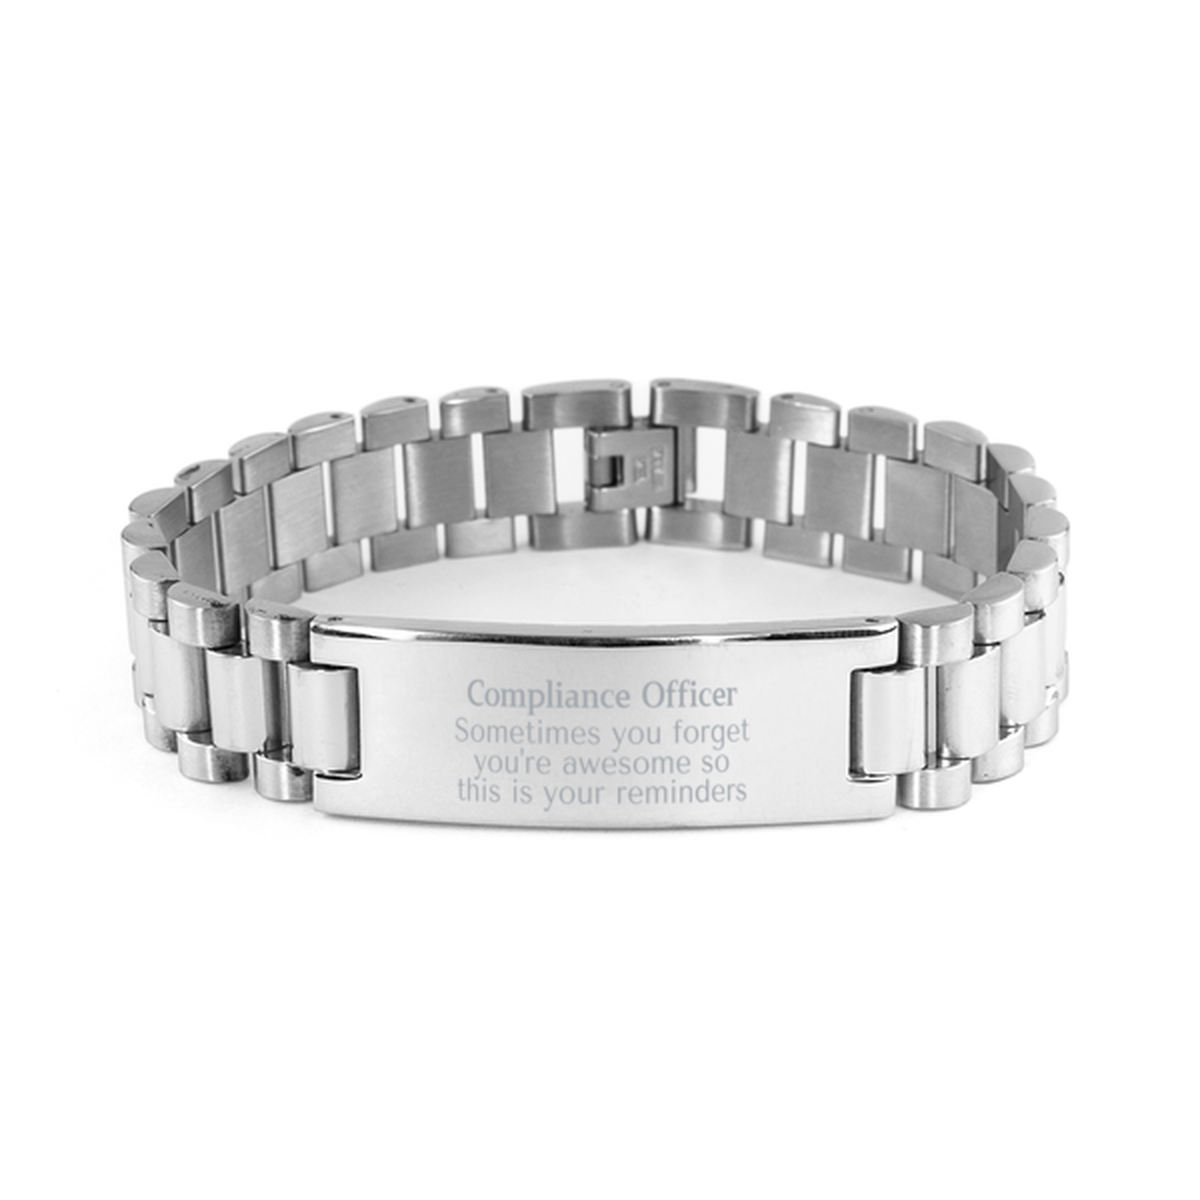 Sentimental Compliance Officer Ladder Stainless Steel Bracelet, Compliance Officer Sometimes you forget you're awesome so this is your reminders, Graduation Christmas Birthday Gifts for Compliance Officer, Men, Women, Coworkers